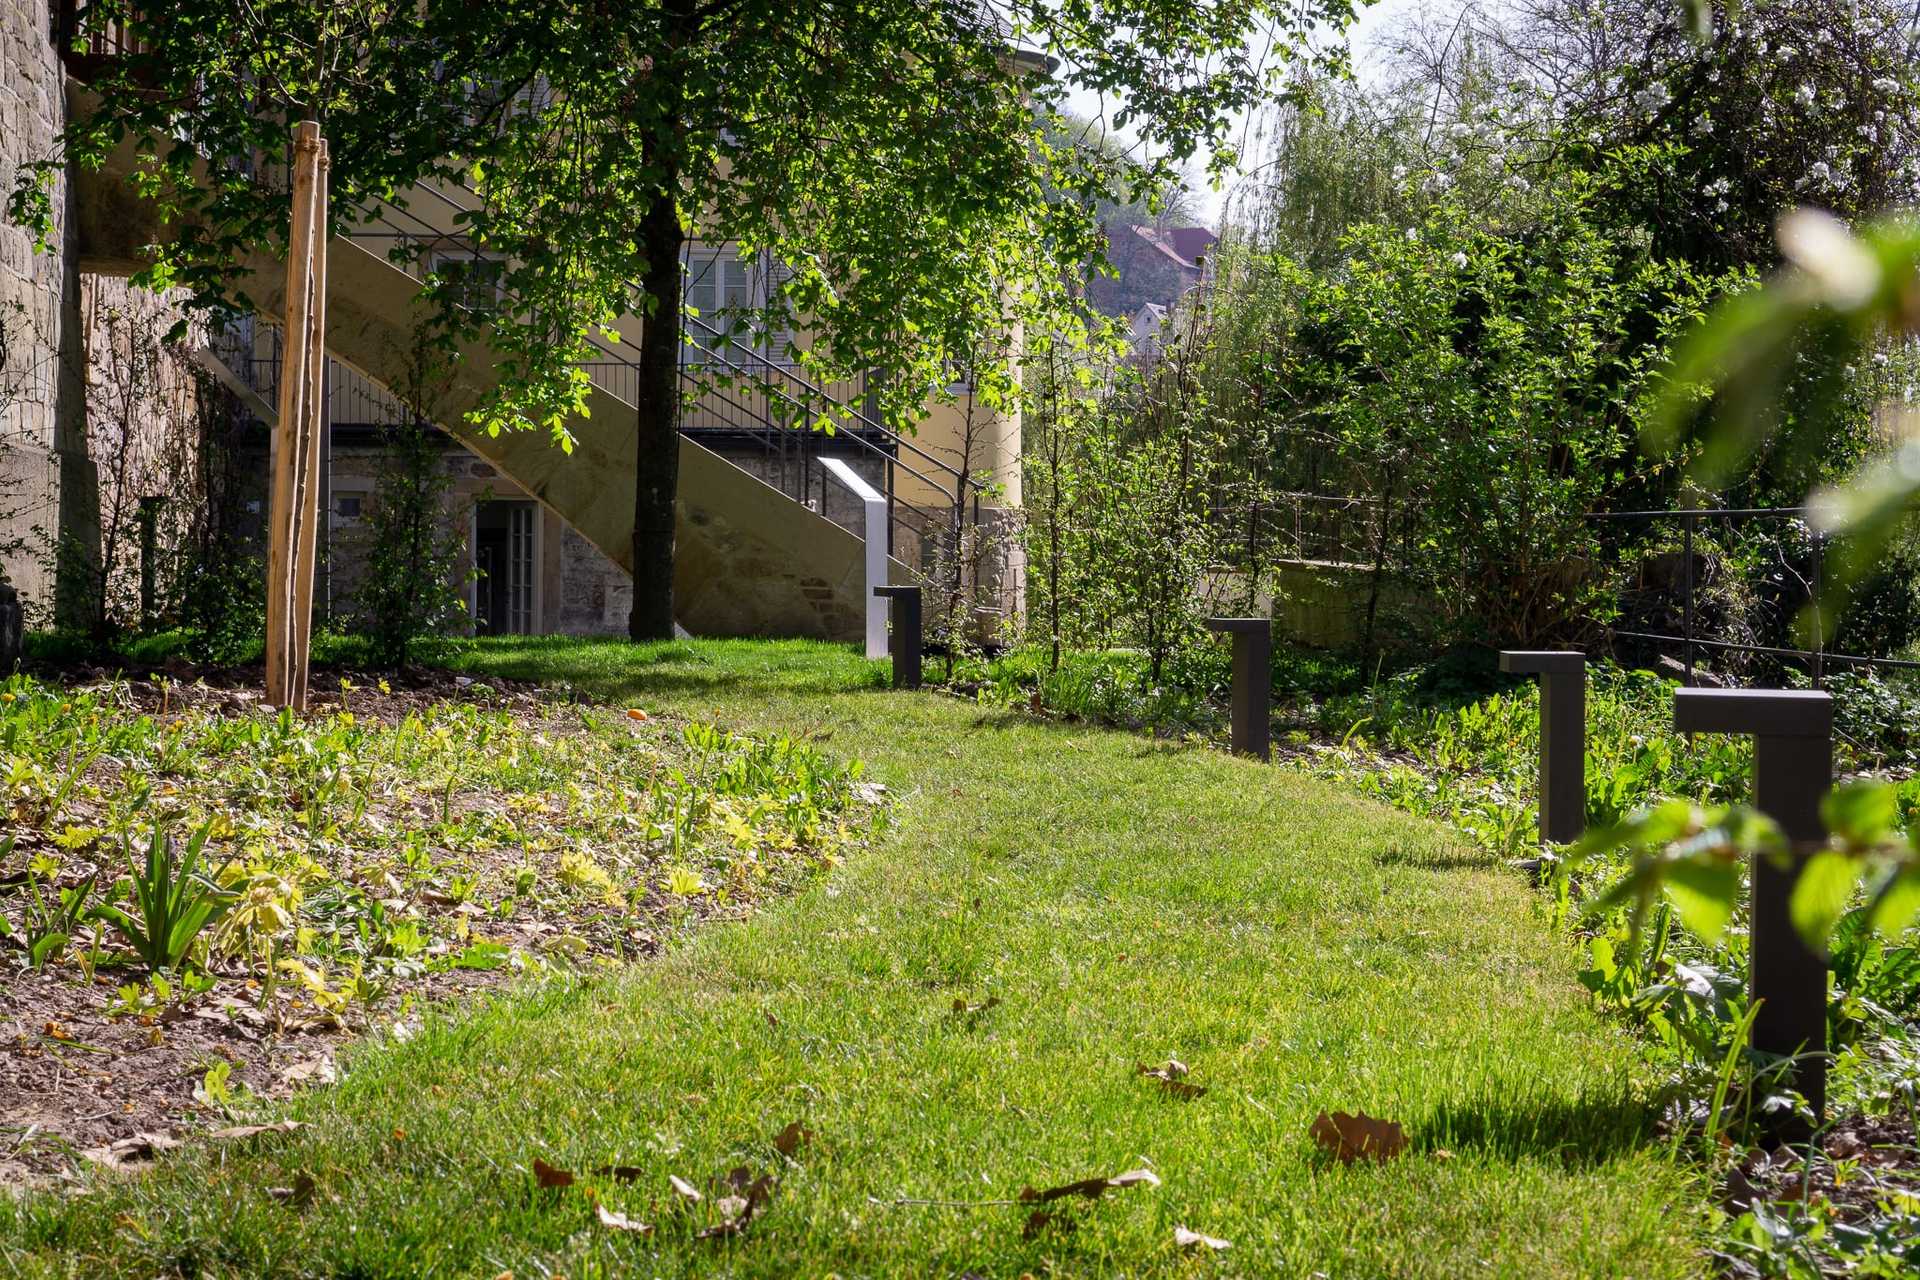 A winding path in the museum garden.